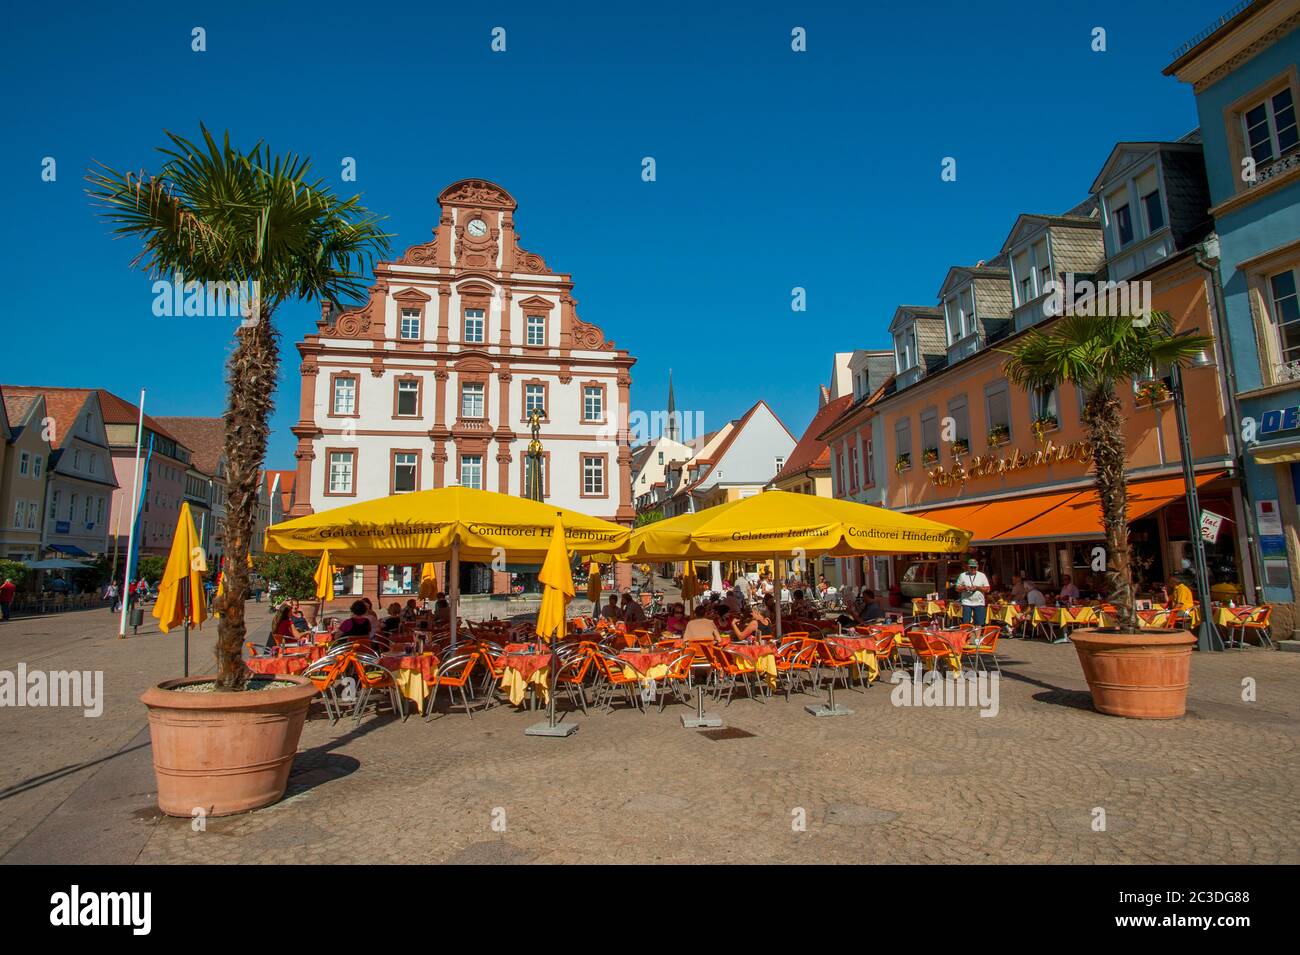 The market place with sidewalk restaurants and the old Mint on the Maximilian Street in Speyer, a town on the Rhine River in Germany. Stock Photo